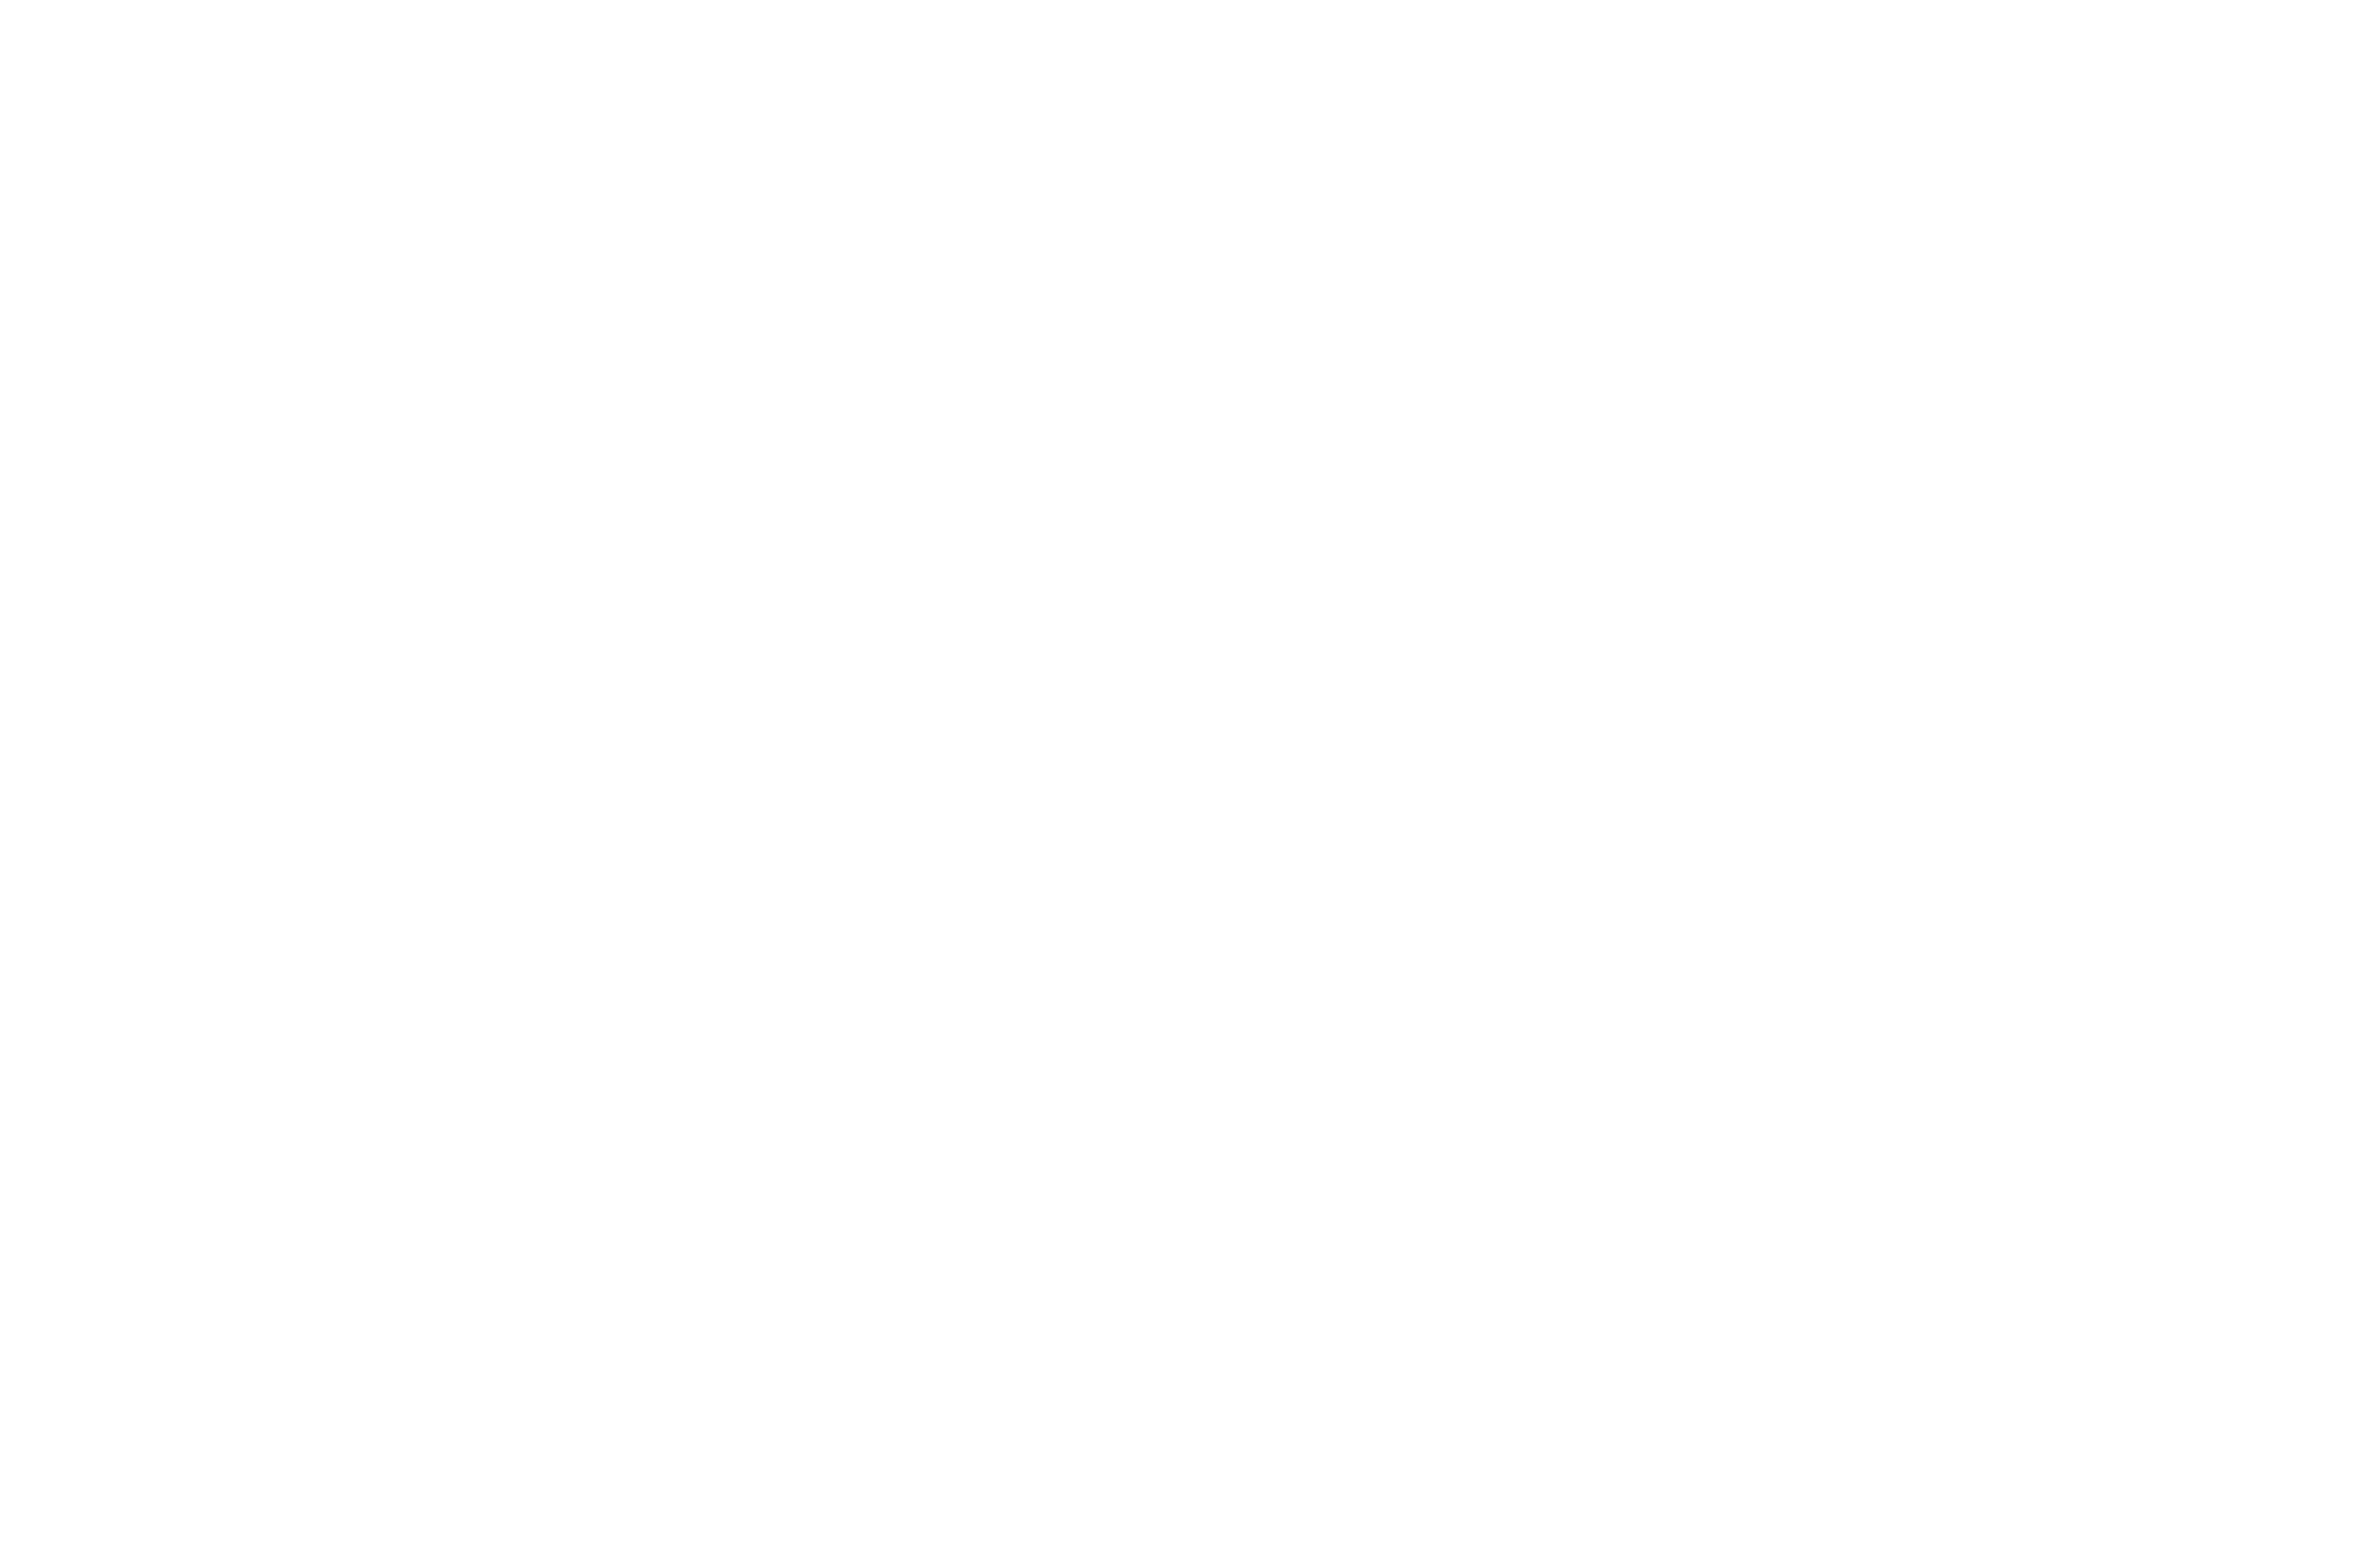 OFFICIALSELECTION-DickensHorrorFilmFestival-2020-White.png